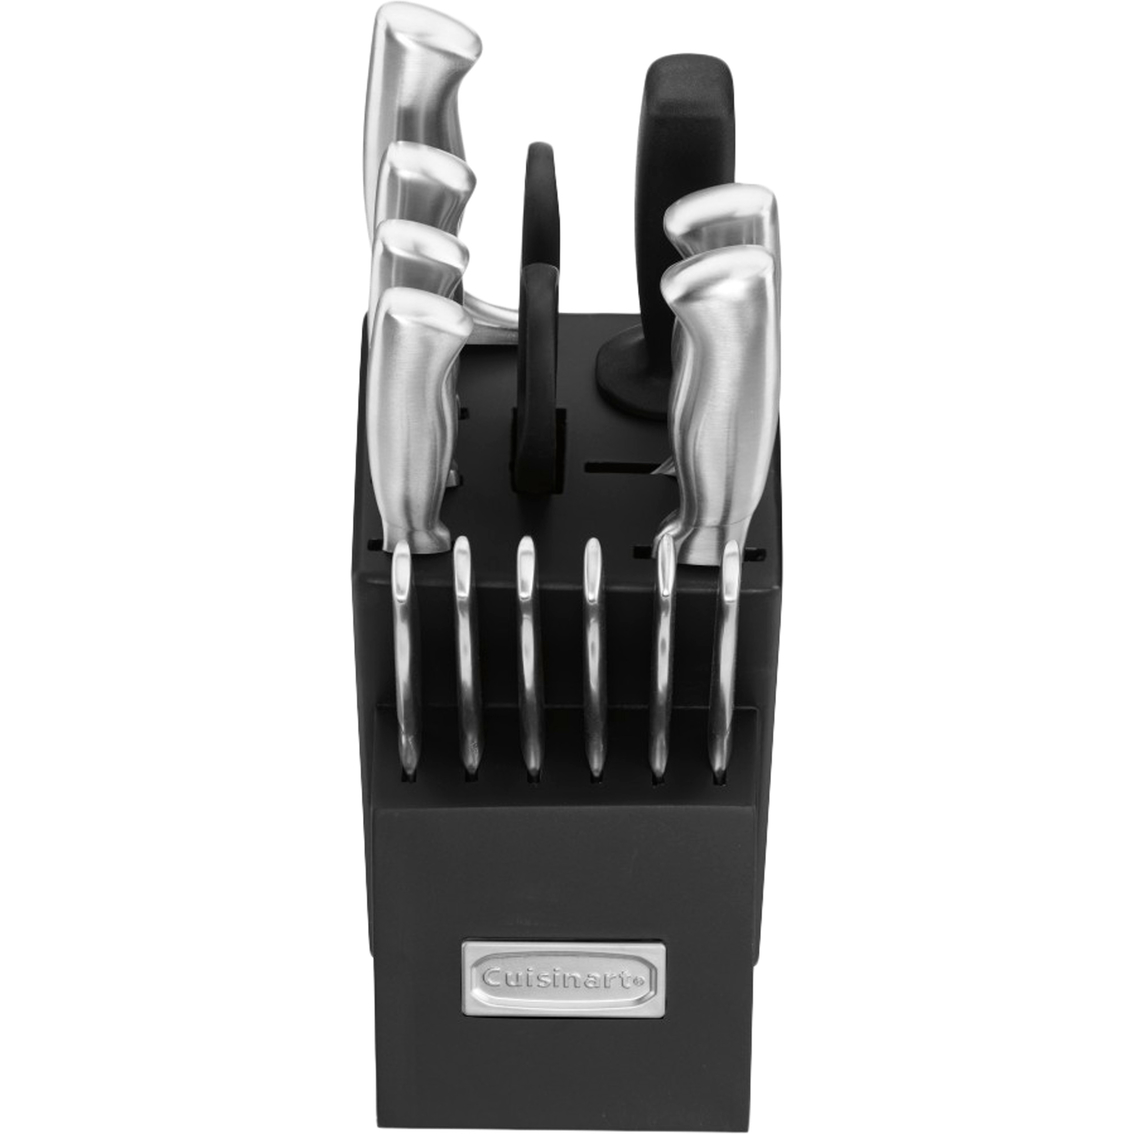 Cuisinart 15 pc. Stainless Steel Hollow Handle Cutlery Block Set - Image 2 of 2